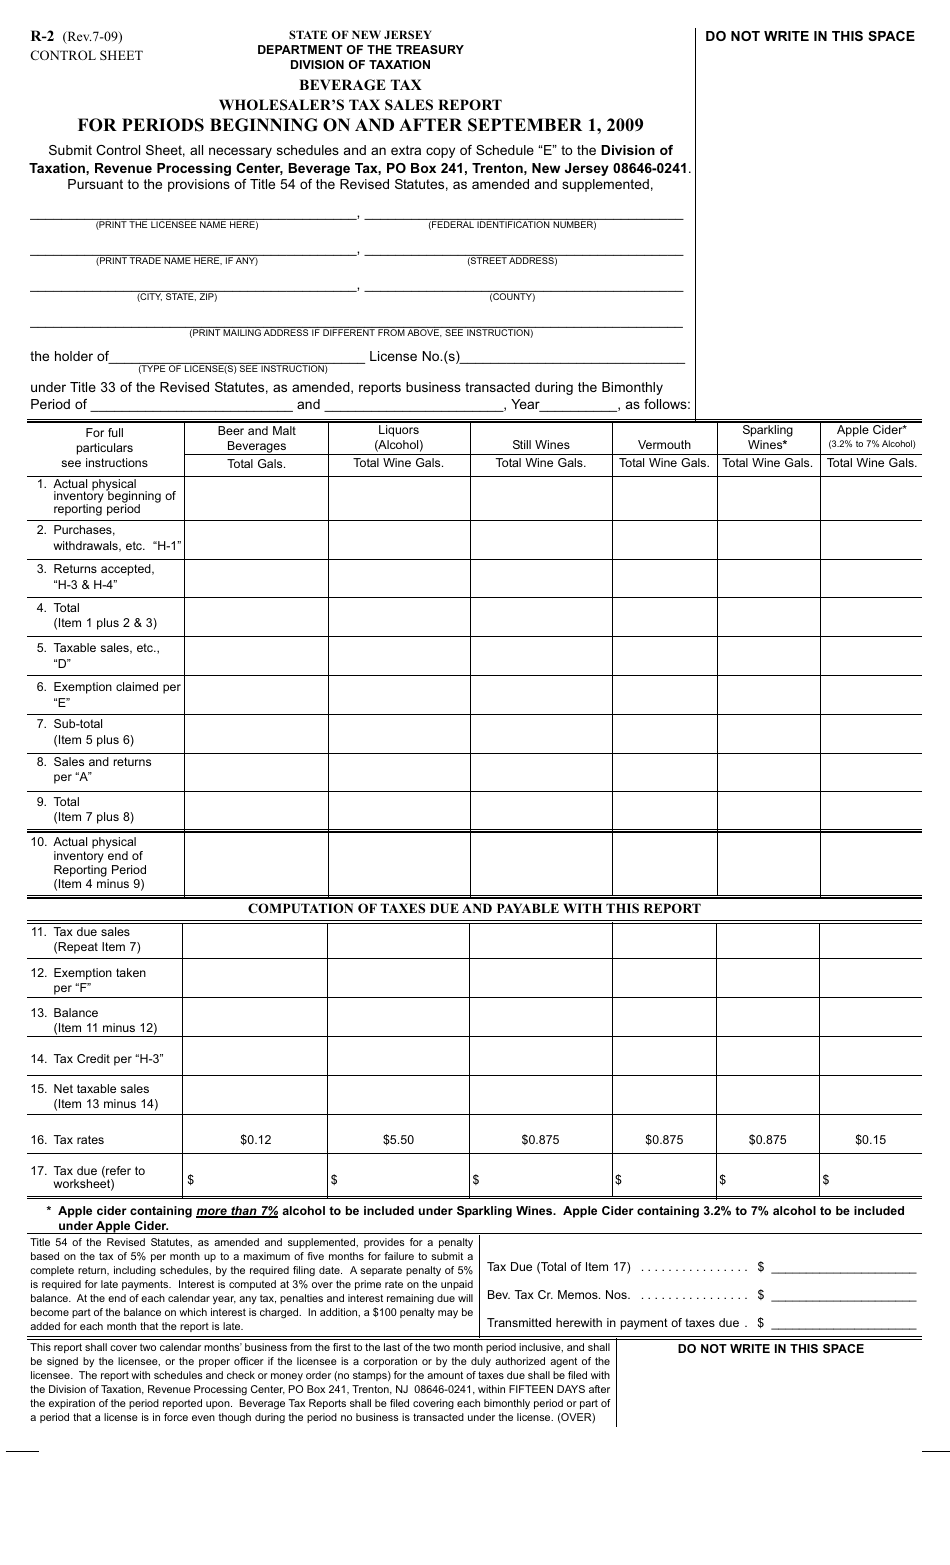 Form R-2 Wholesalers Tax Sales Report - New Jersey, Page 1